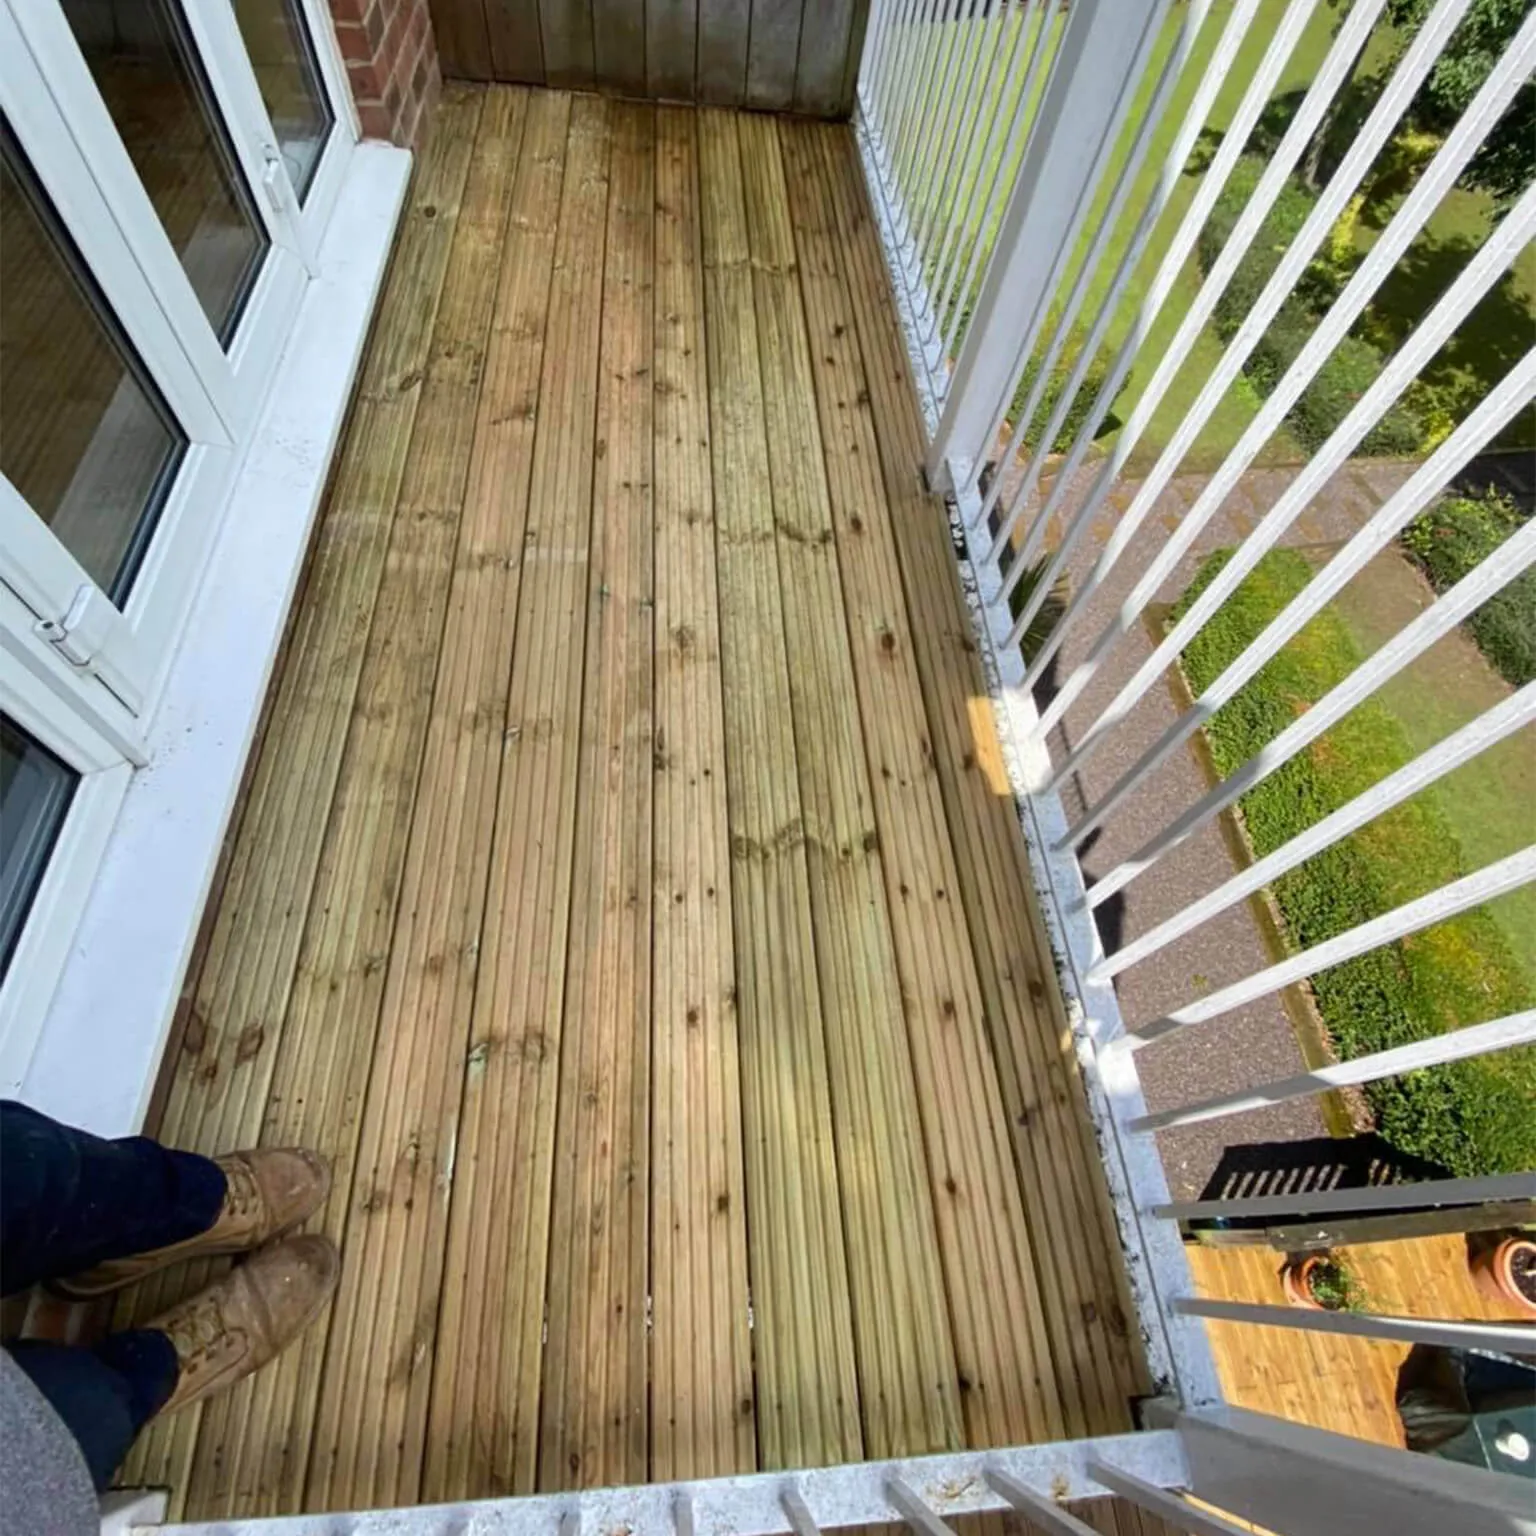 a person standing on a wooden deck next to a door